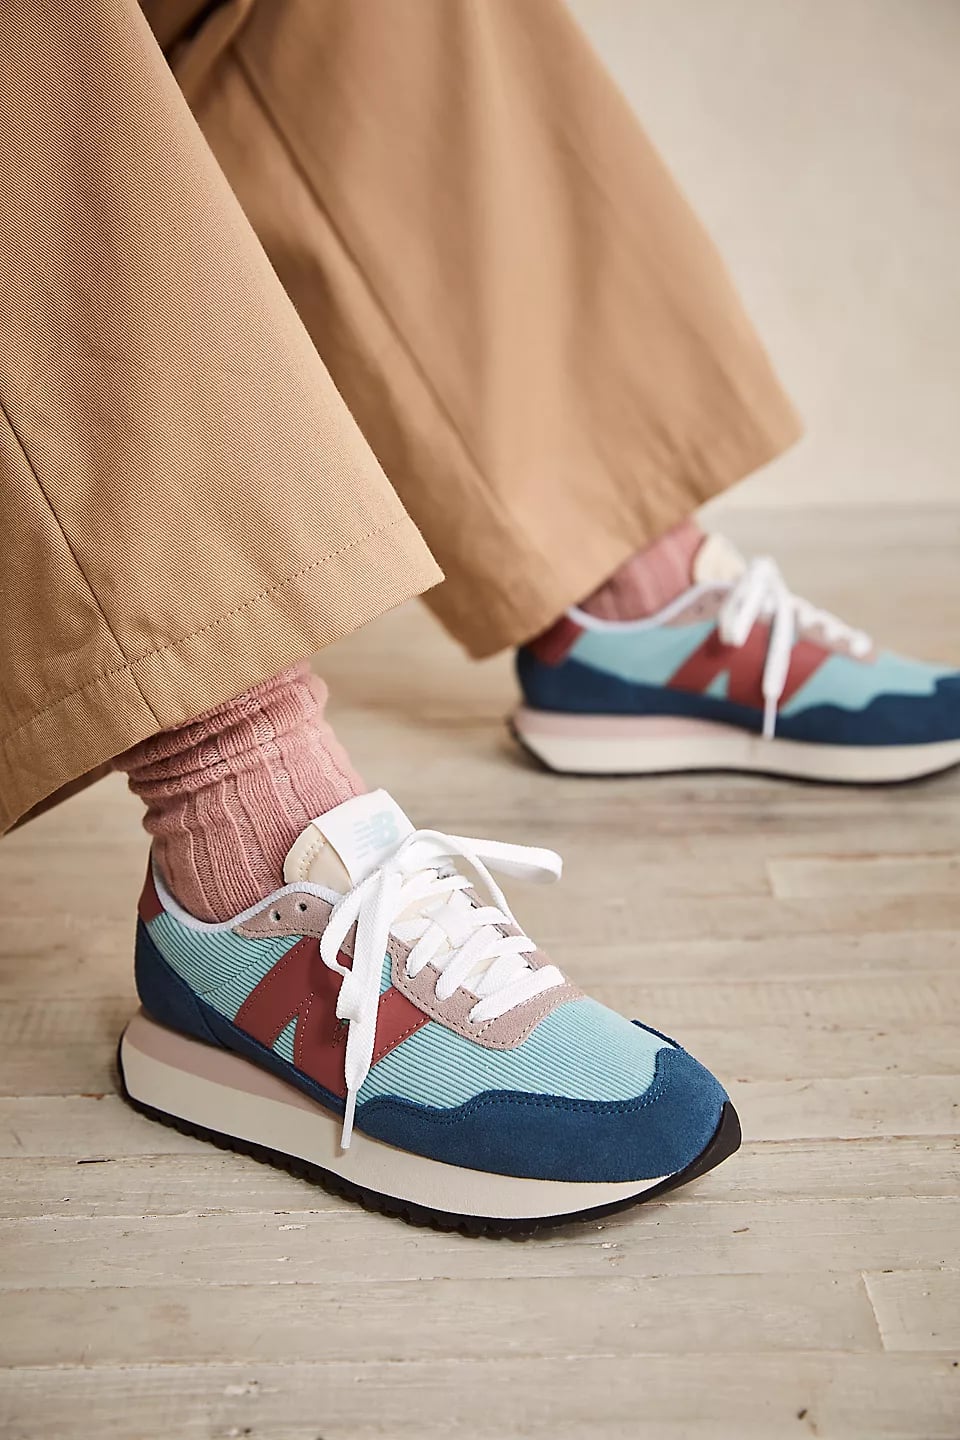 The Stylish Women's Sneakers For Winter 2022 | Fashion